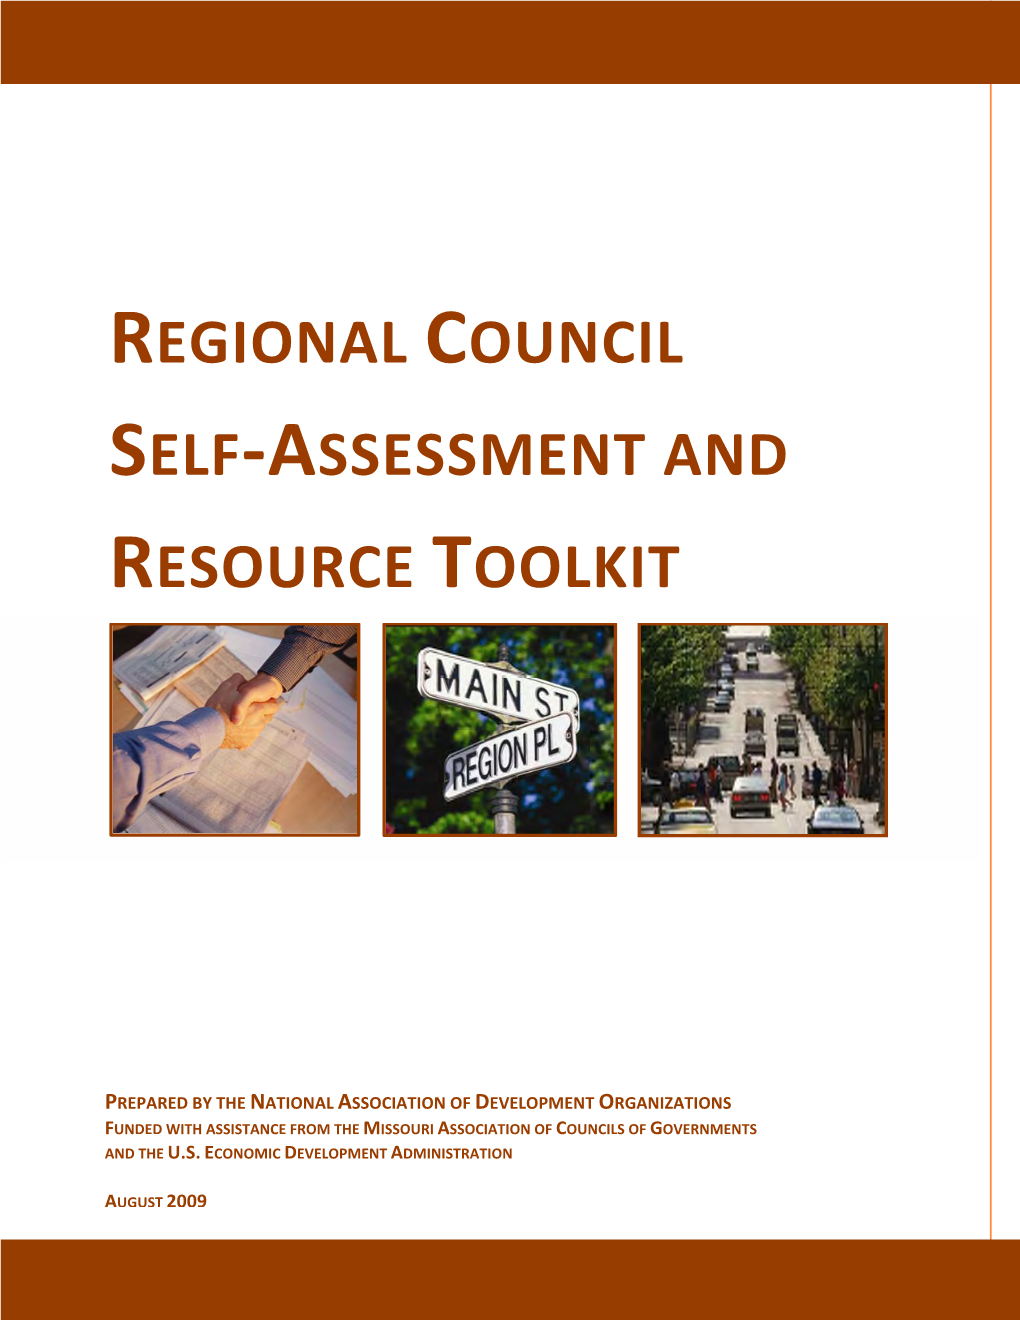 Regional Council Self-Assessment And